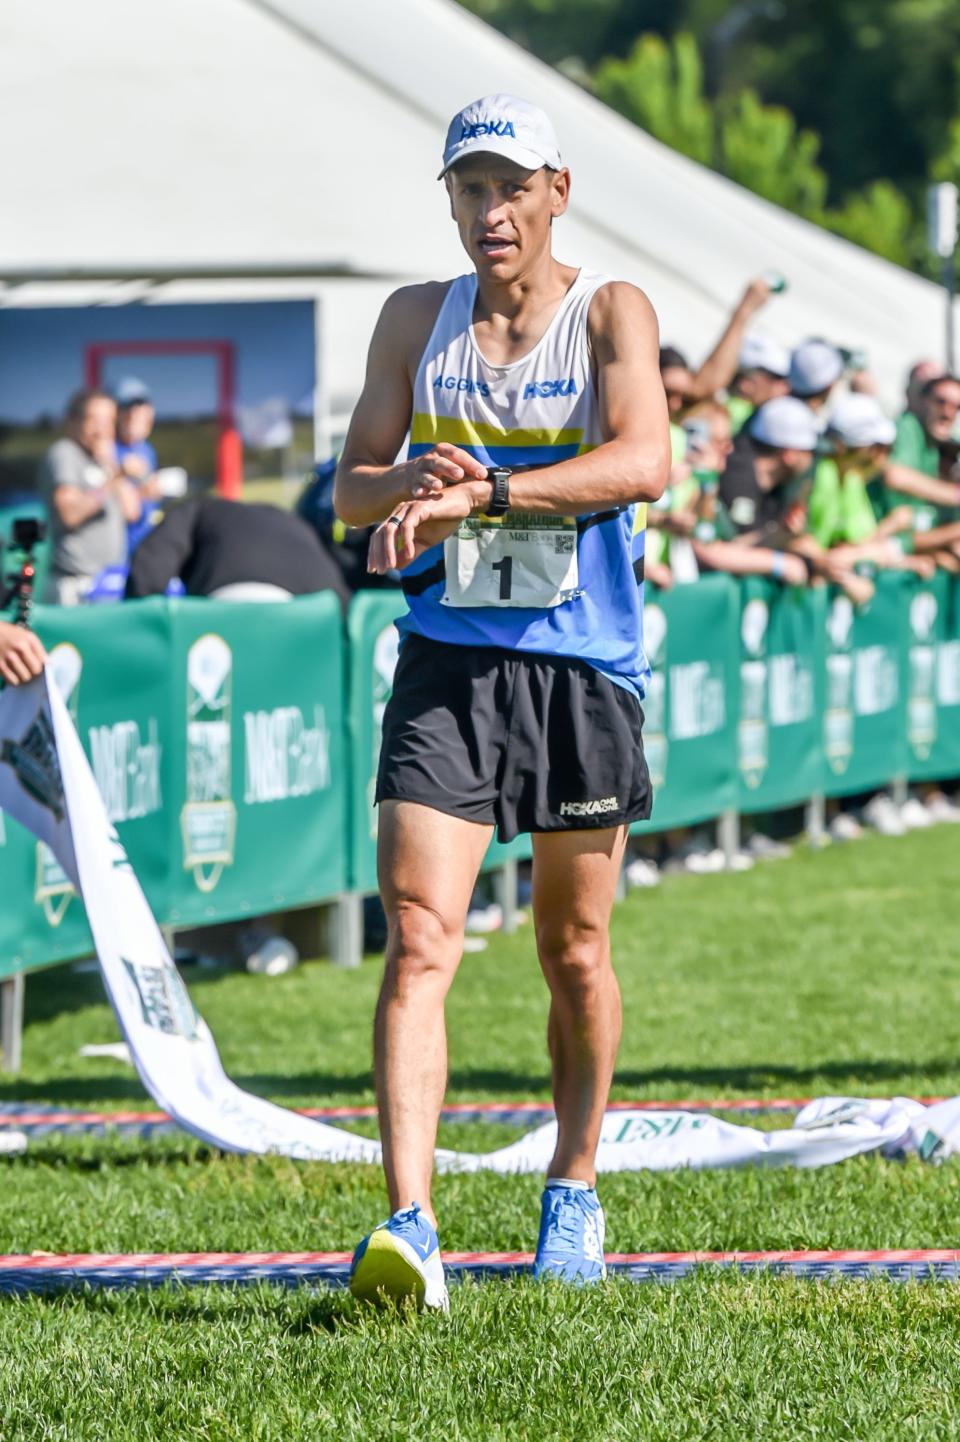 The top male finisher, Sergio Reyes, crosses the finish line at the M&T Bank Vermont City Marathon and Relay on Sunday at Burlington's Waterfront Park.